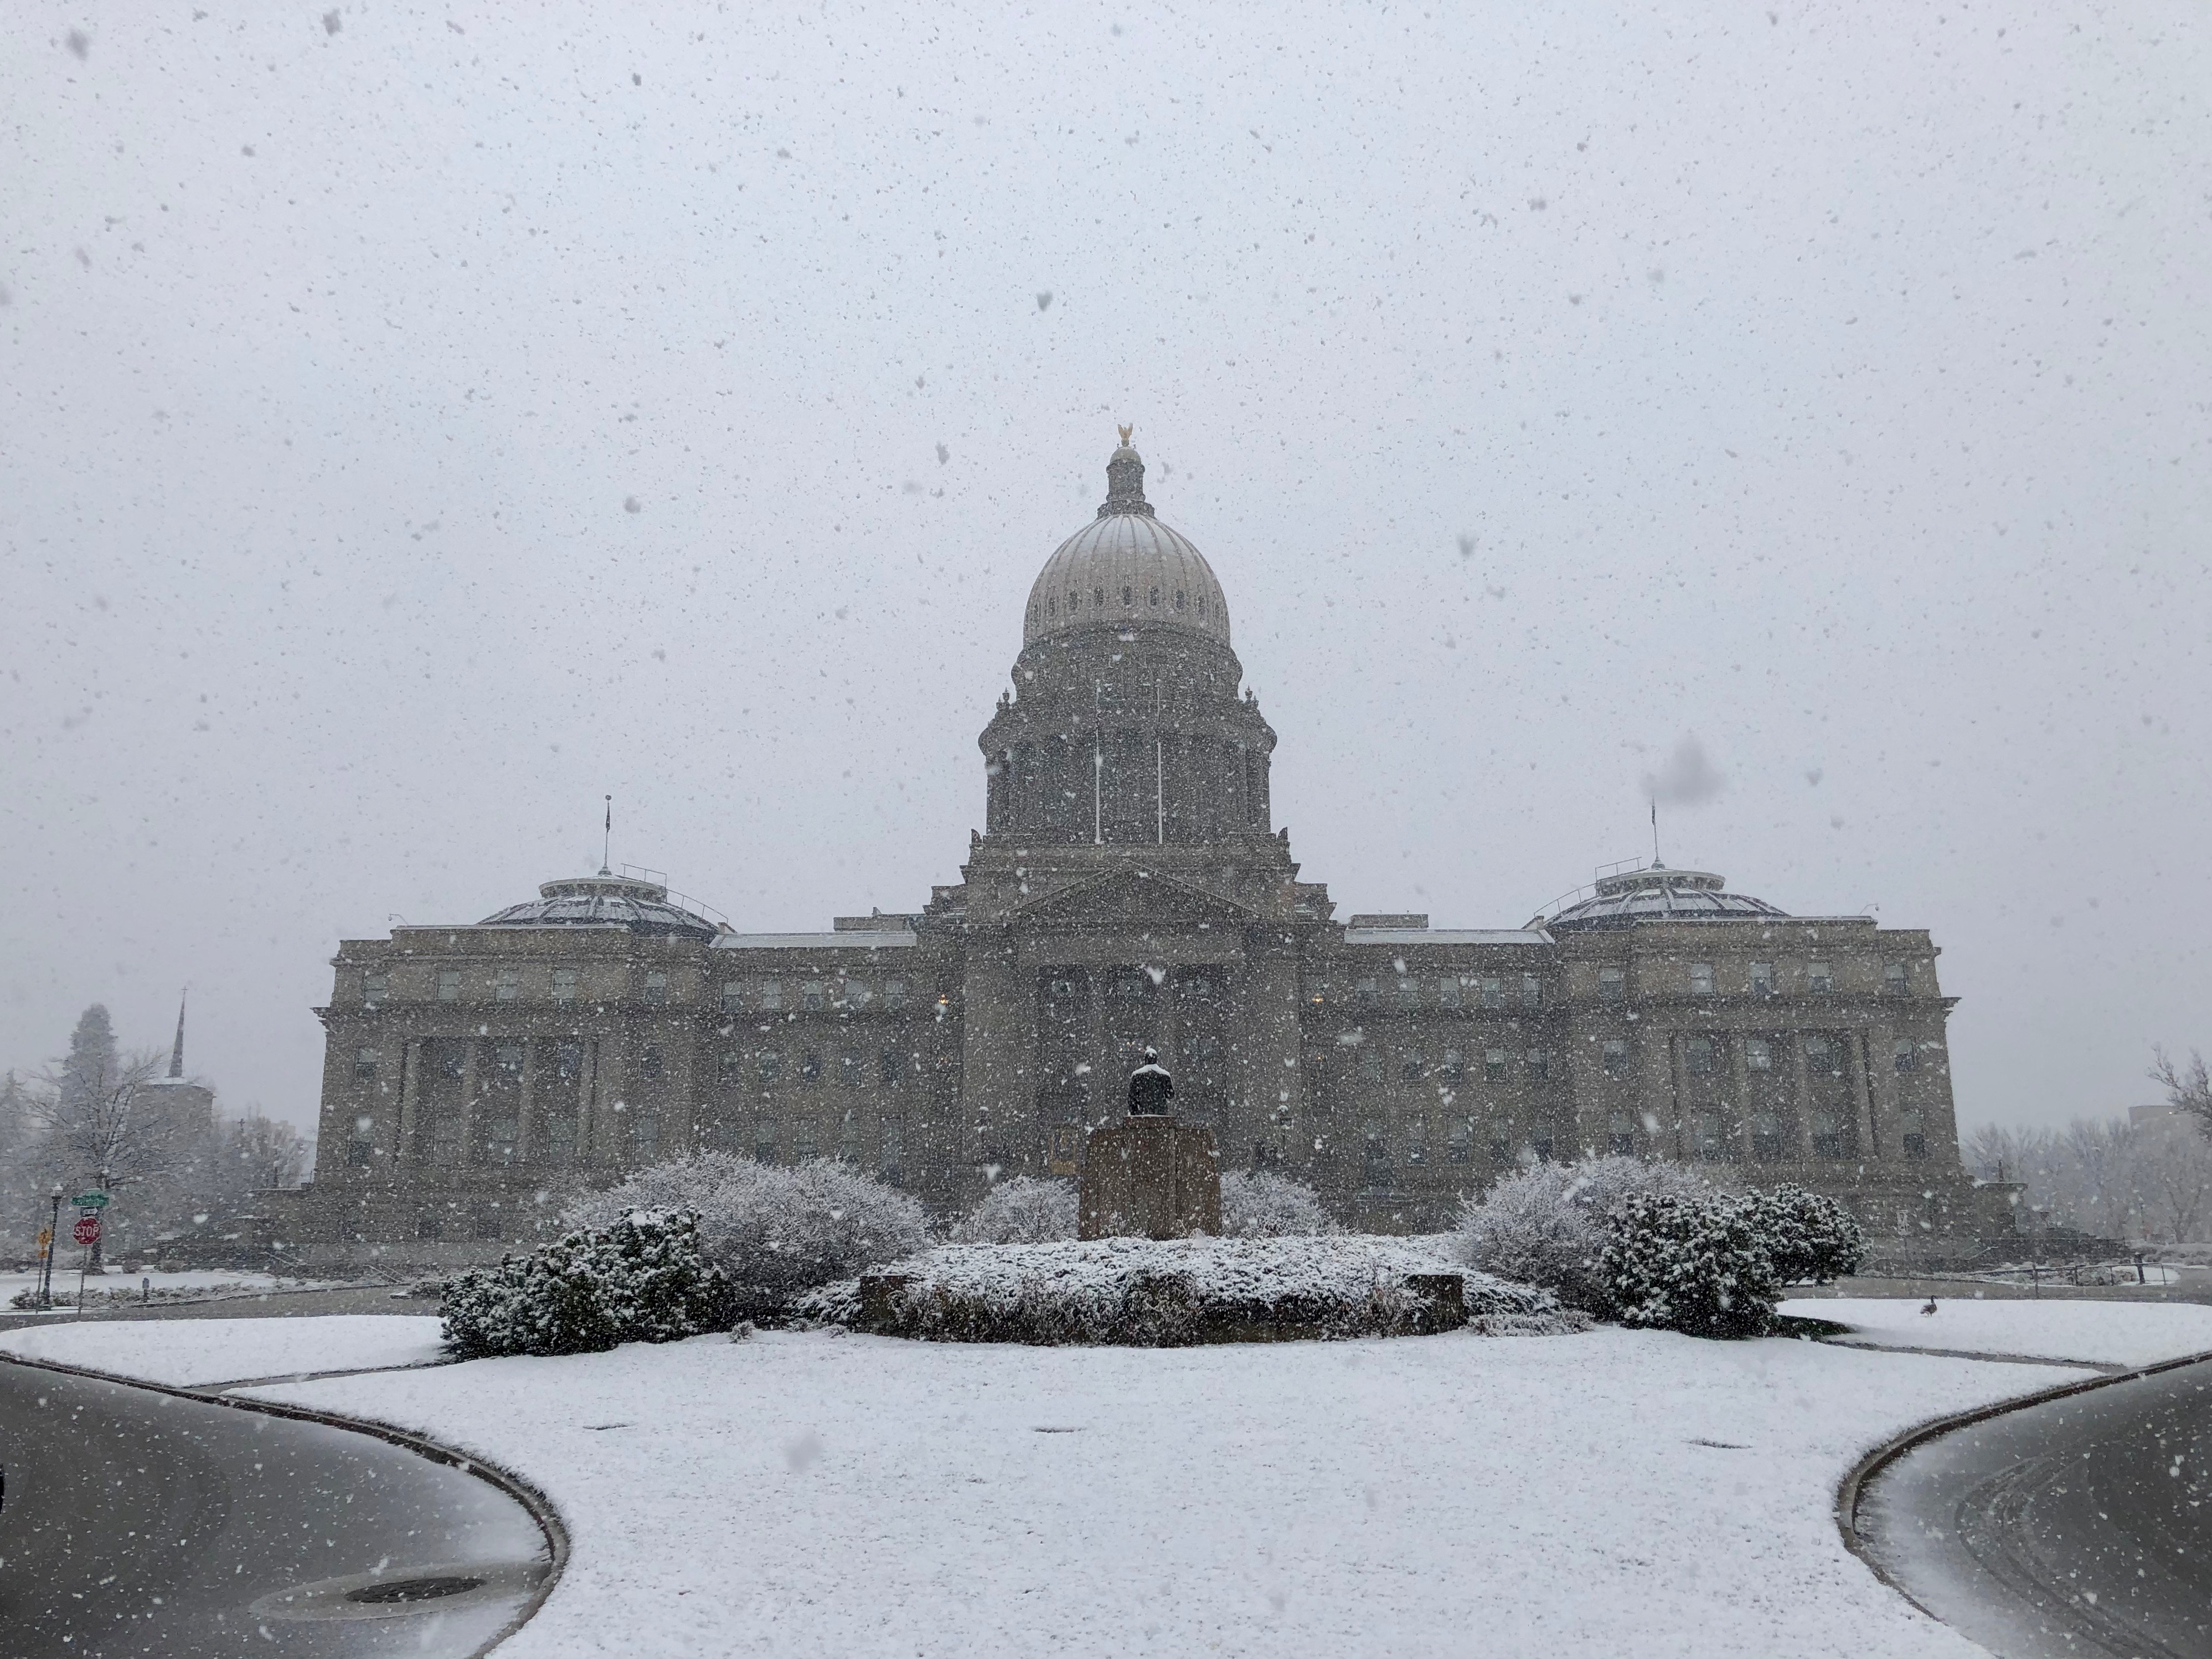 Snow covers the Idaho State Capitol Building in Boise